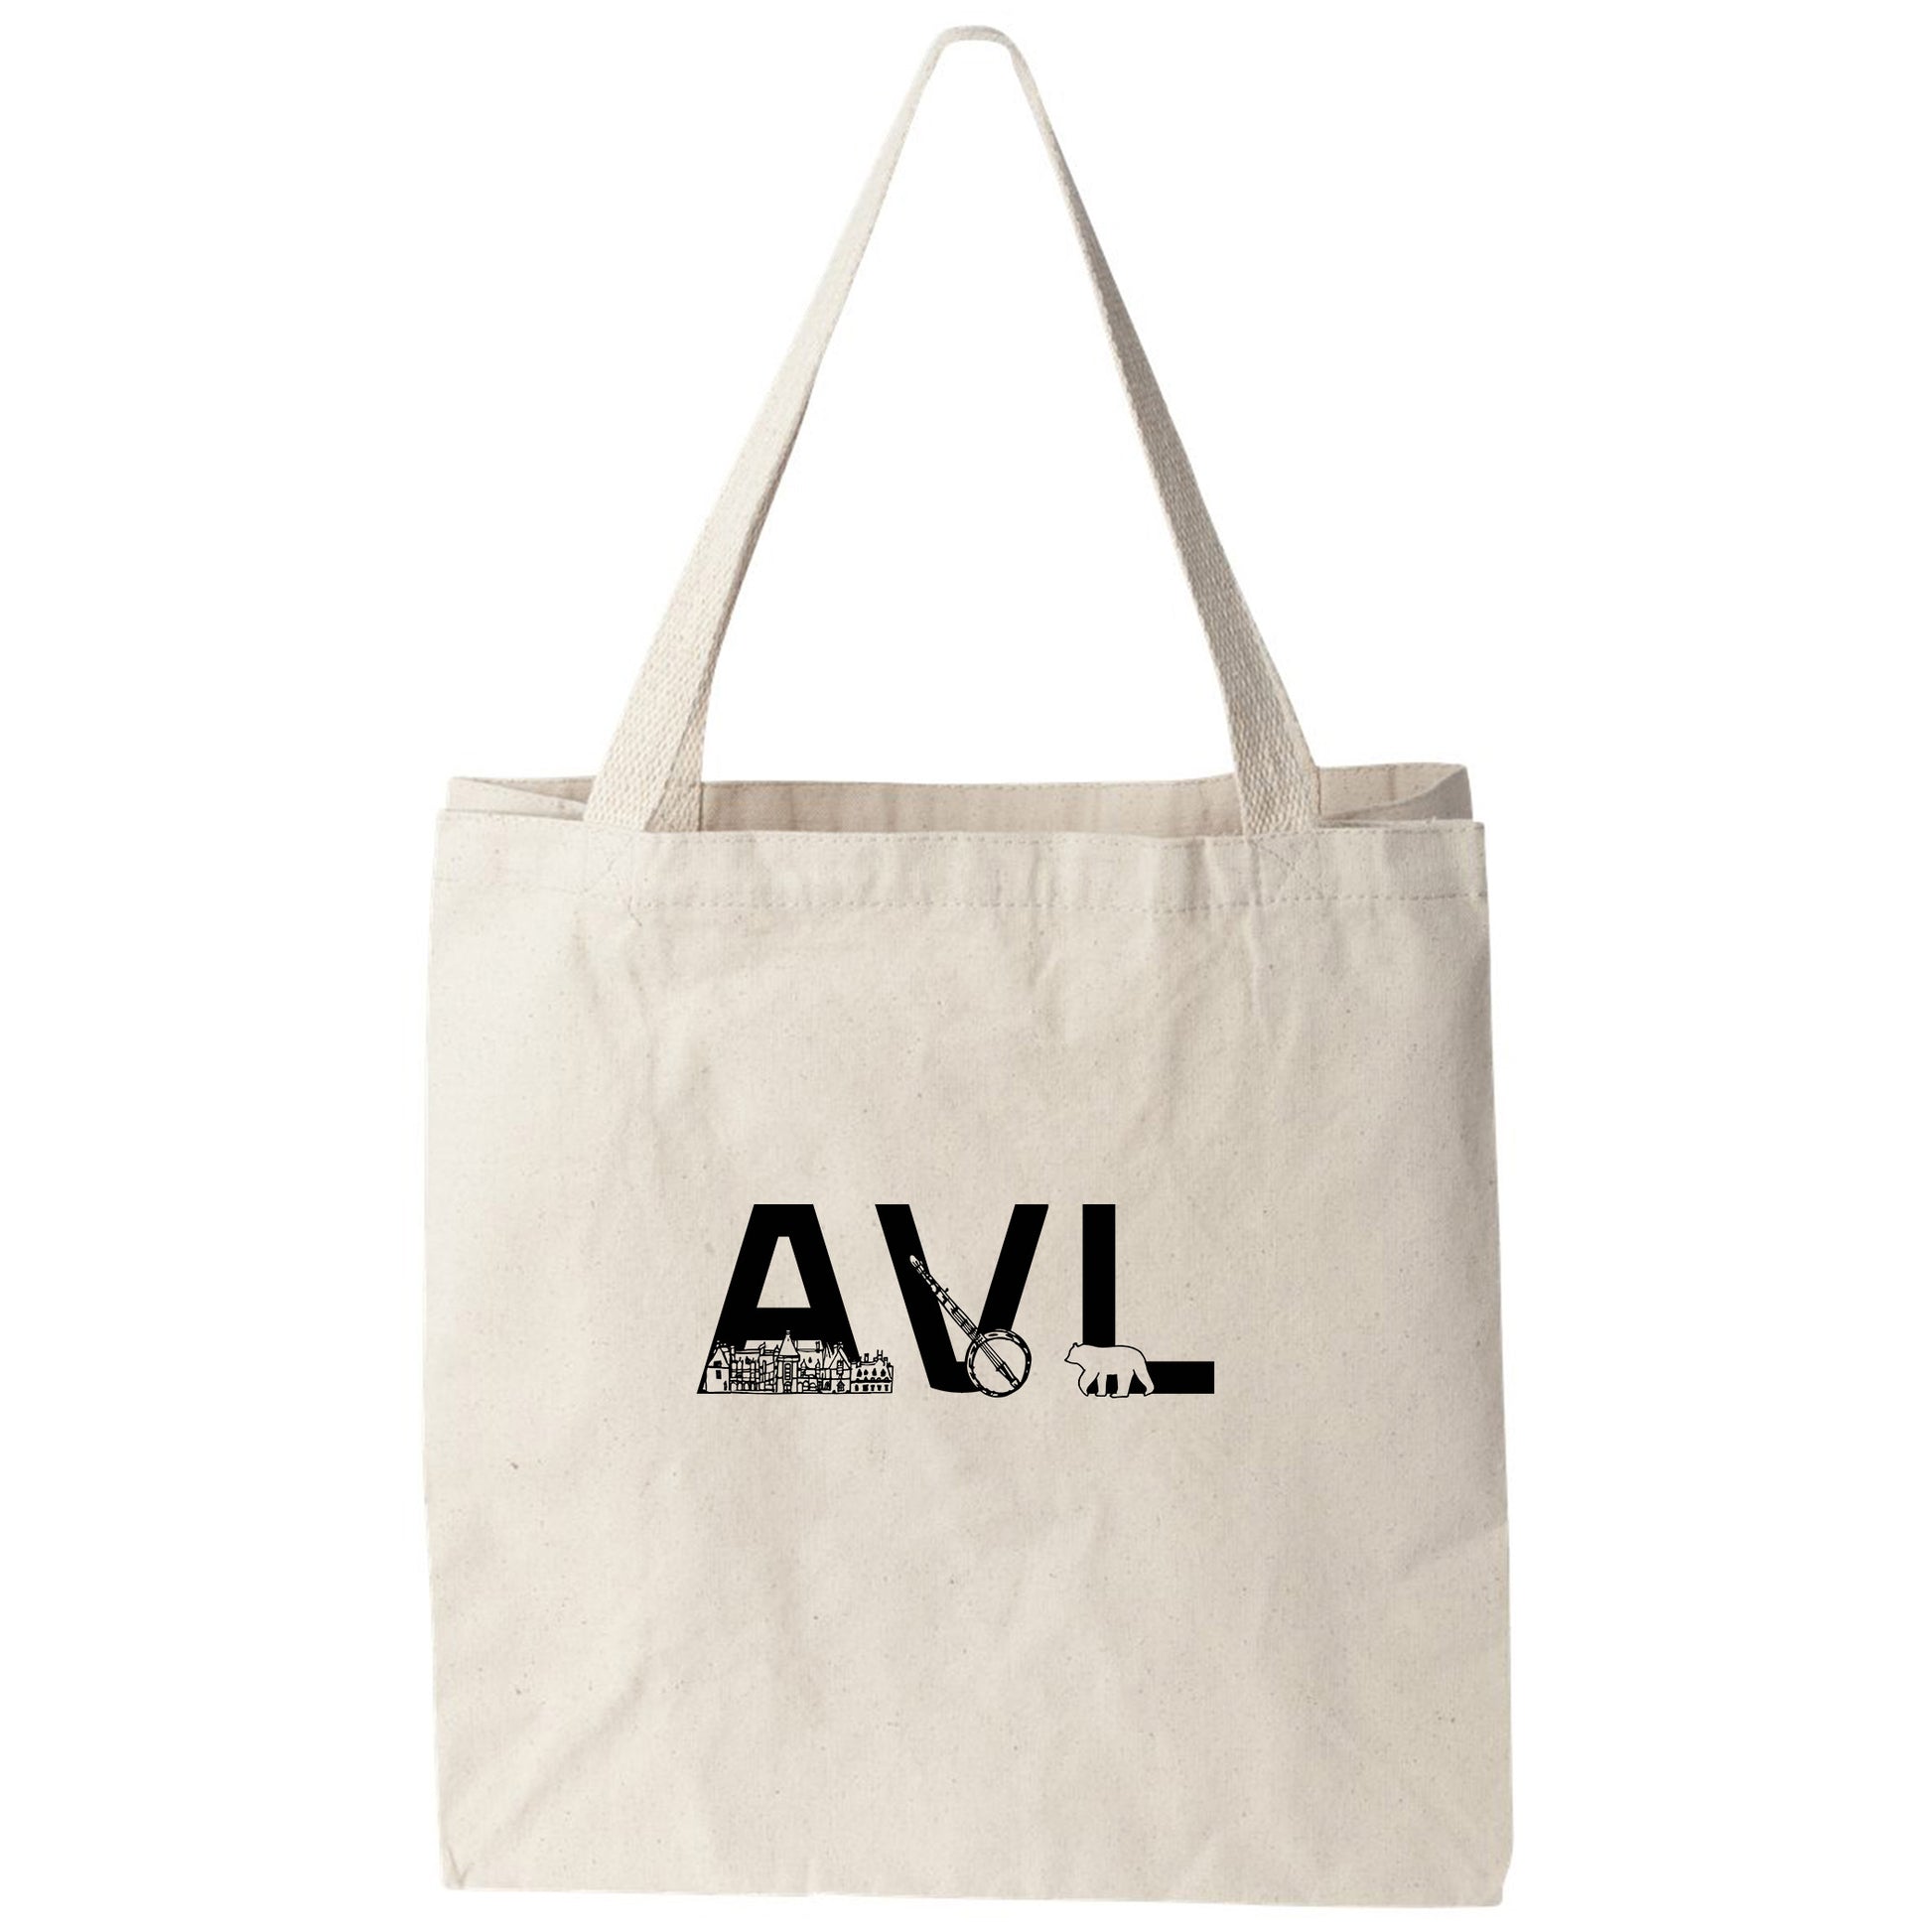 a tote bag with the word avl printed on it